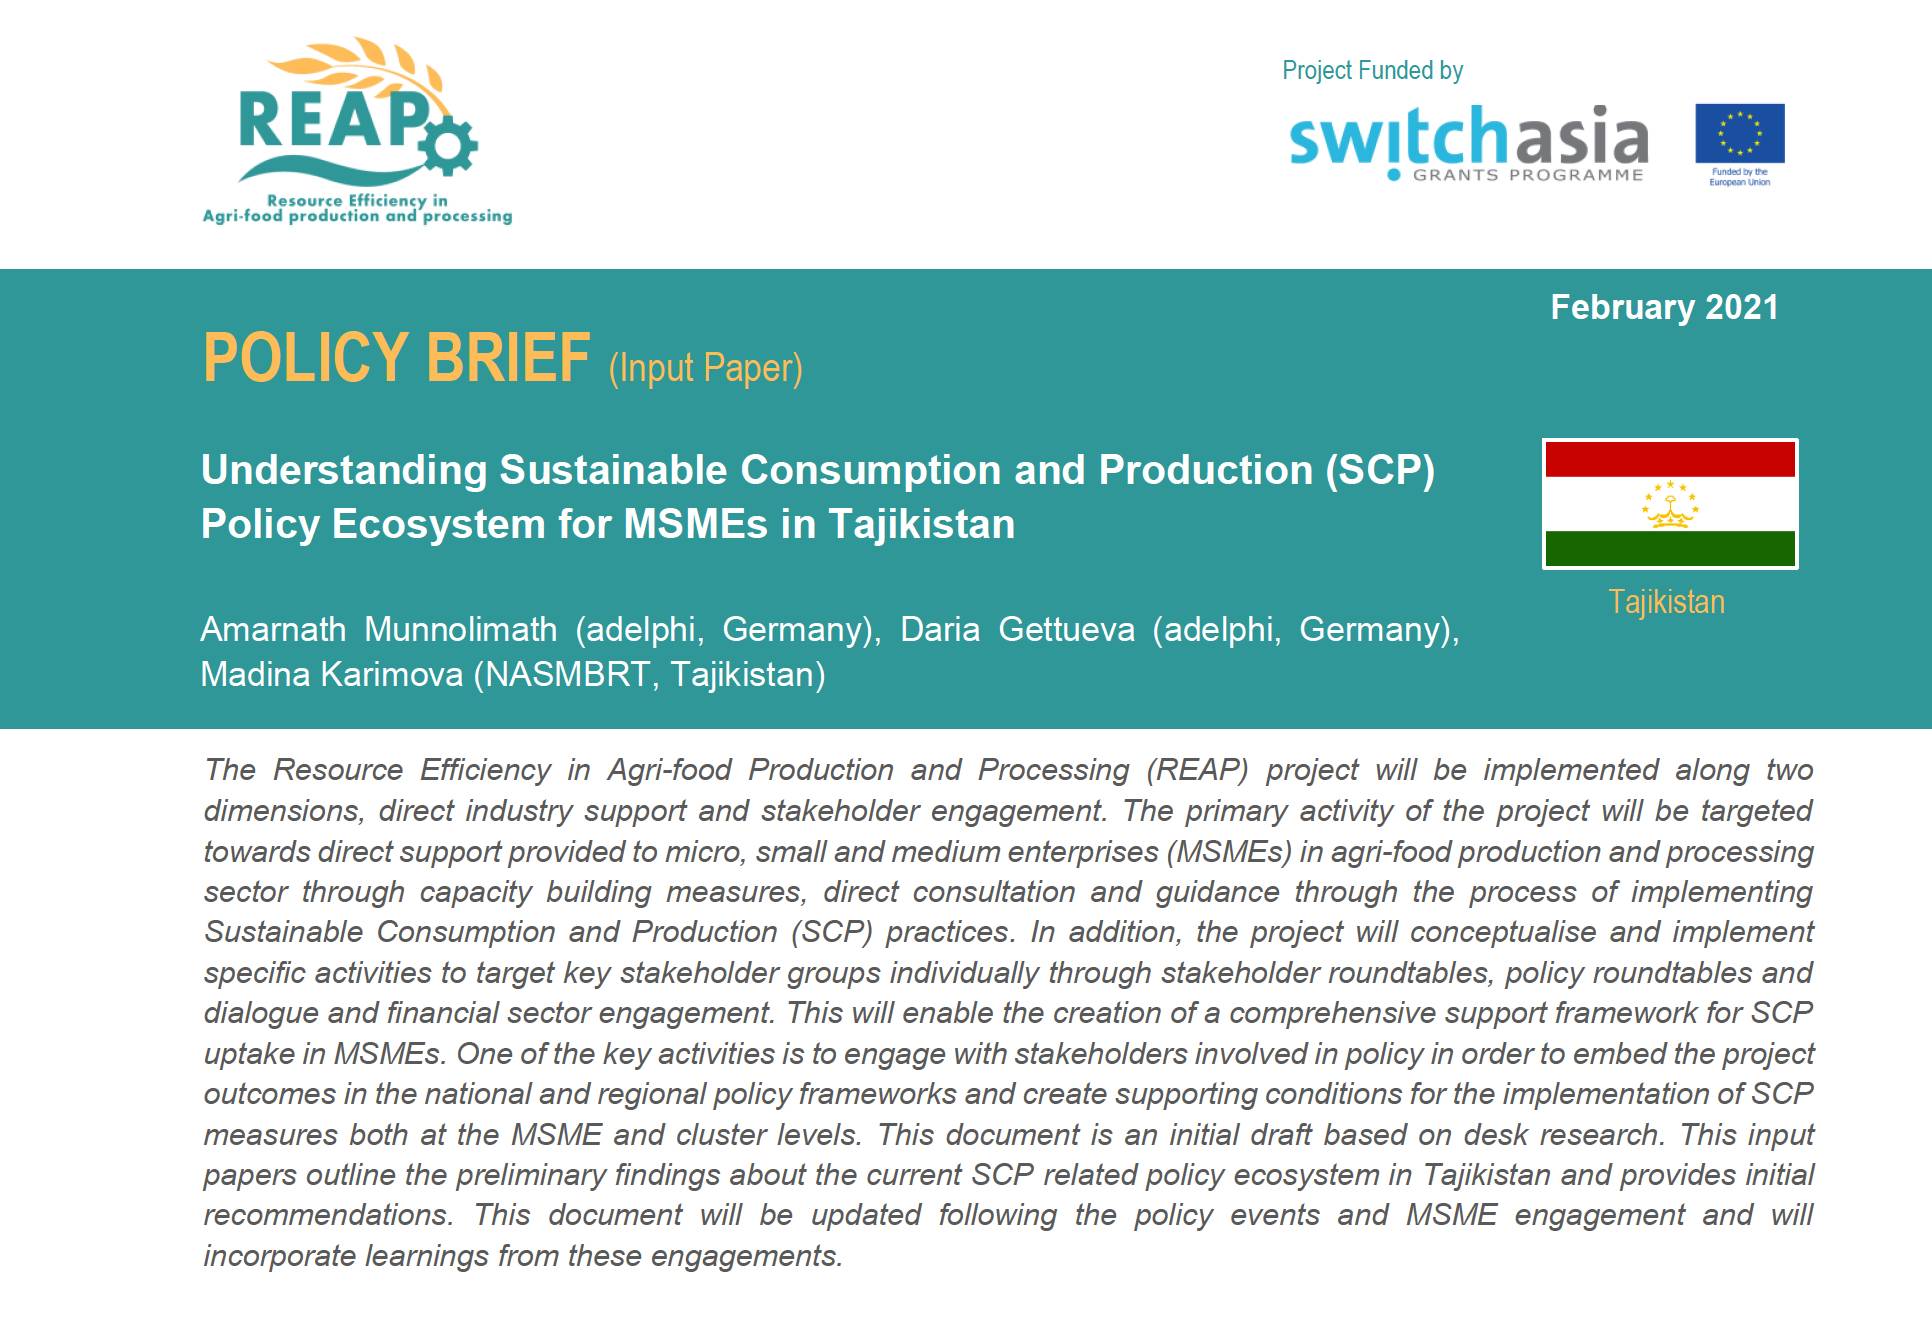 Understanding SCP Policy Ecosystem for MSMEs in Tajikistan